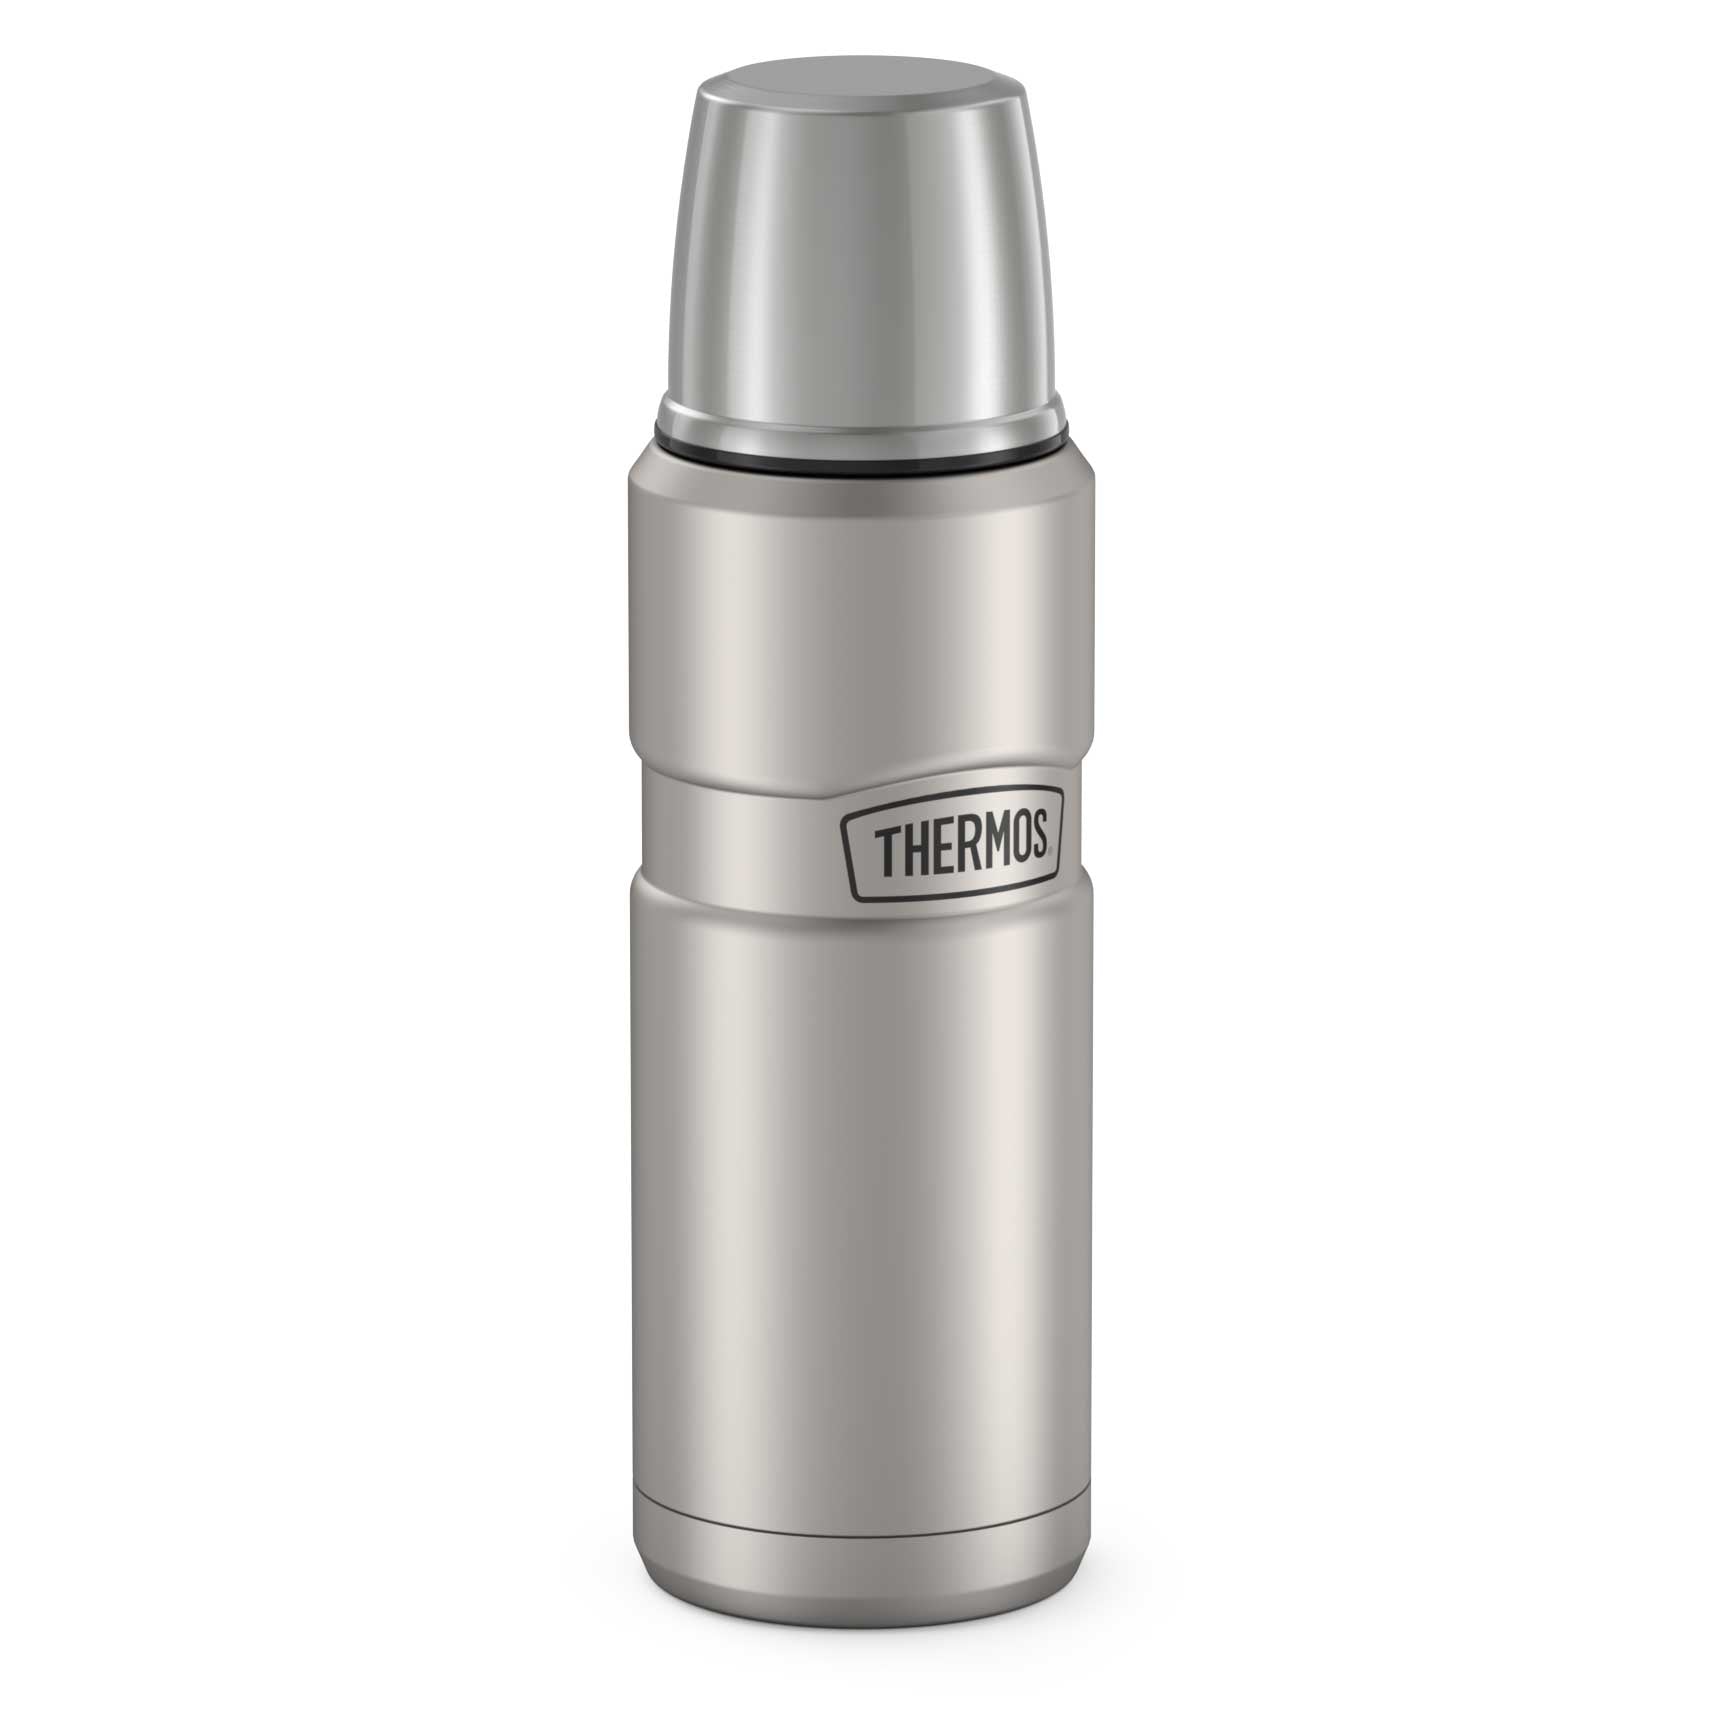 Thermos Stainless Steel Hydration Bottle, 16 oz